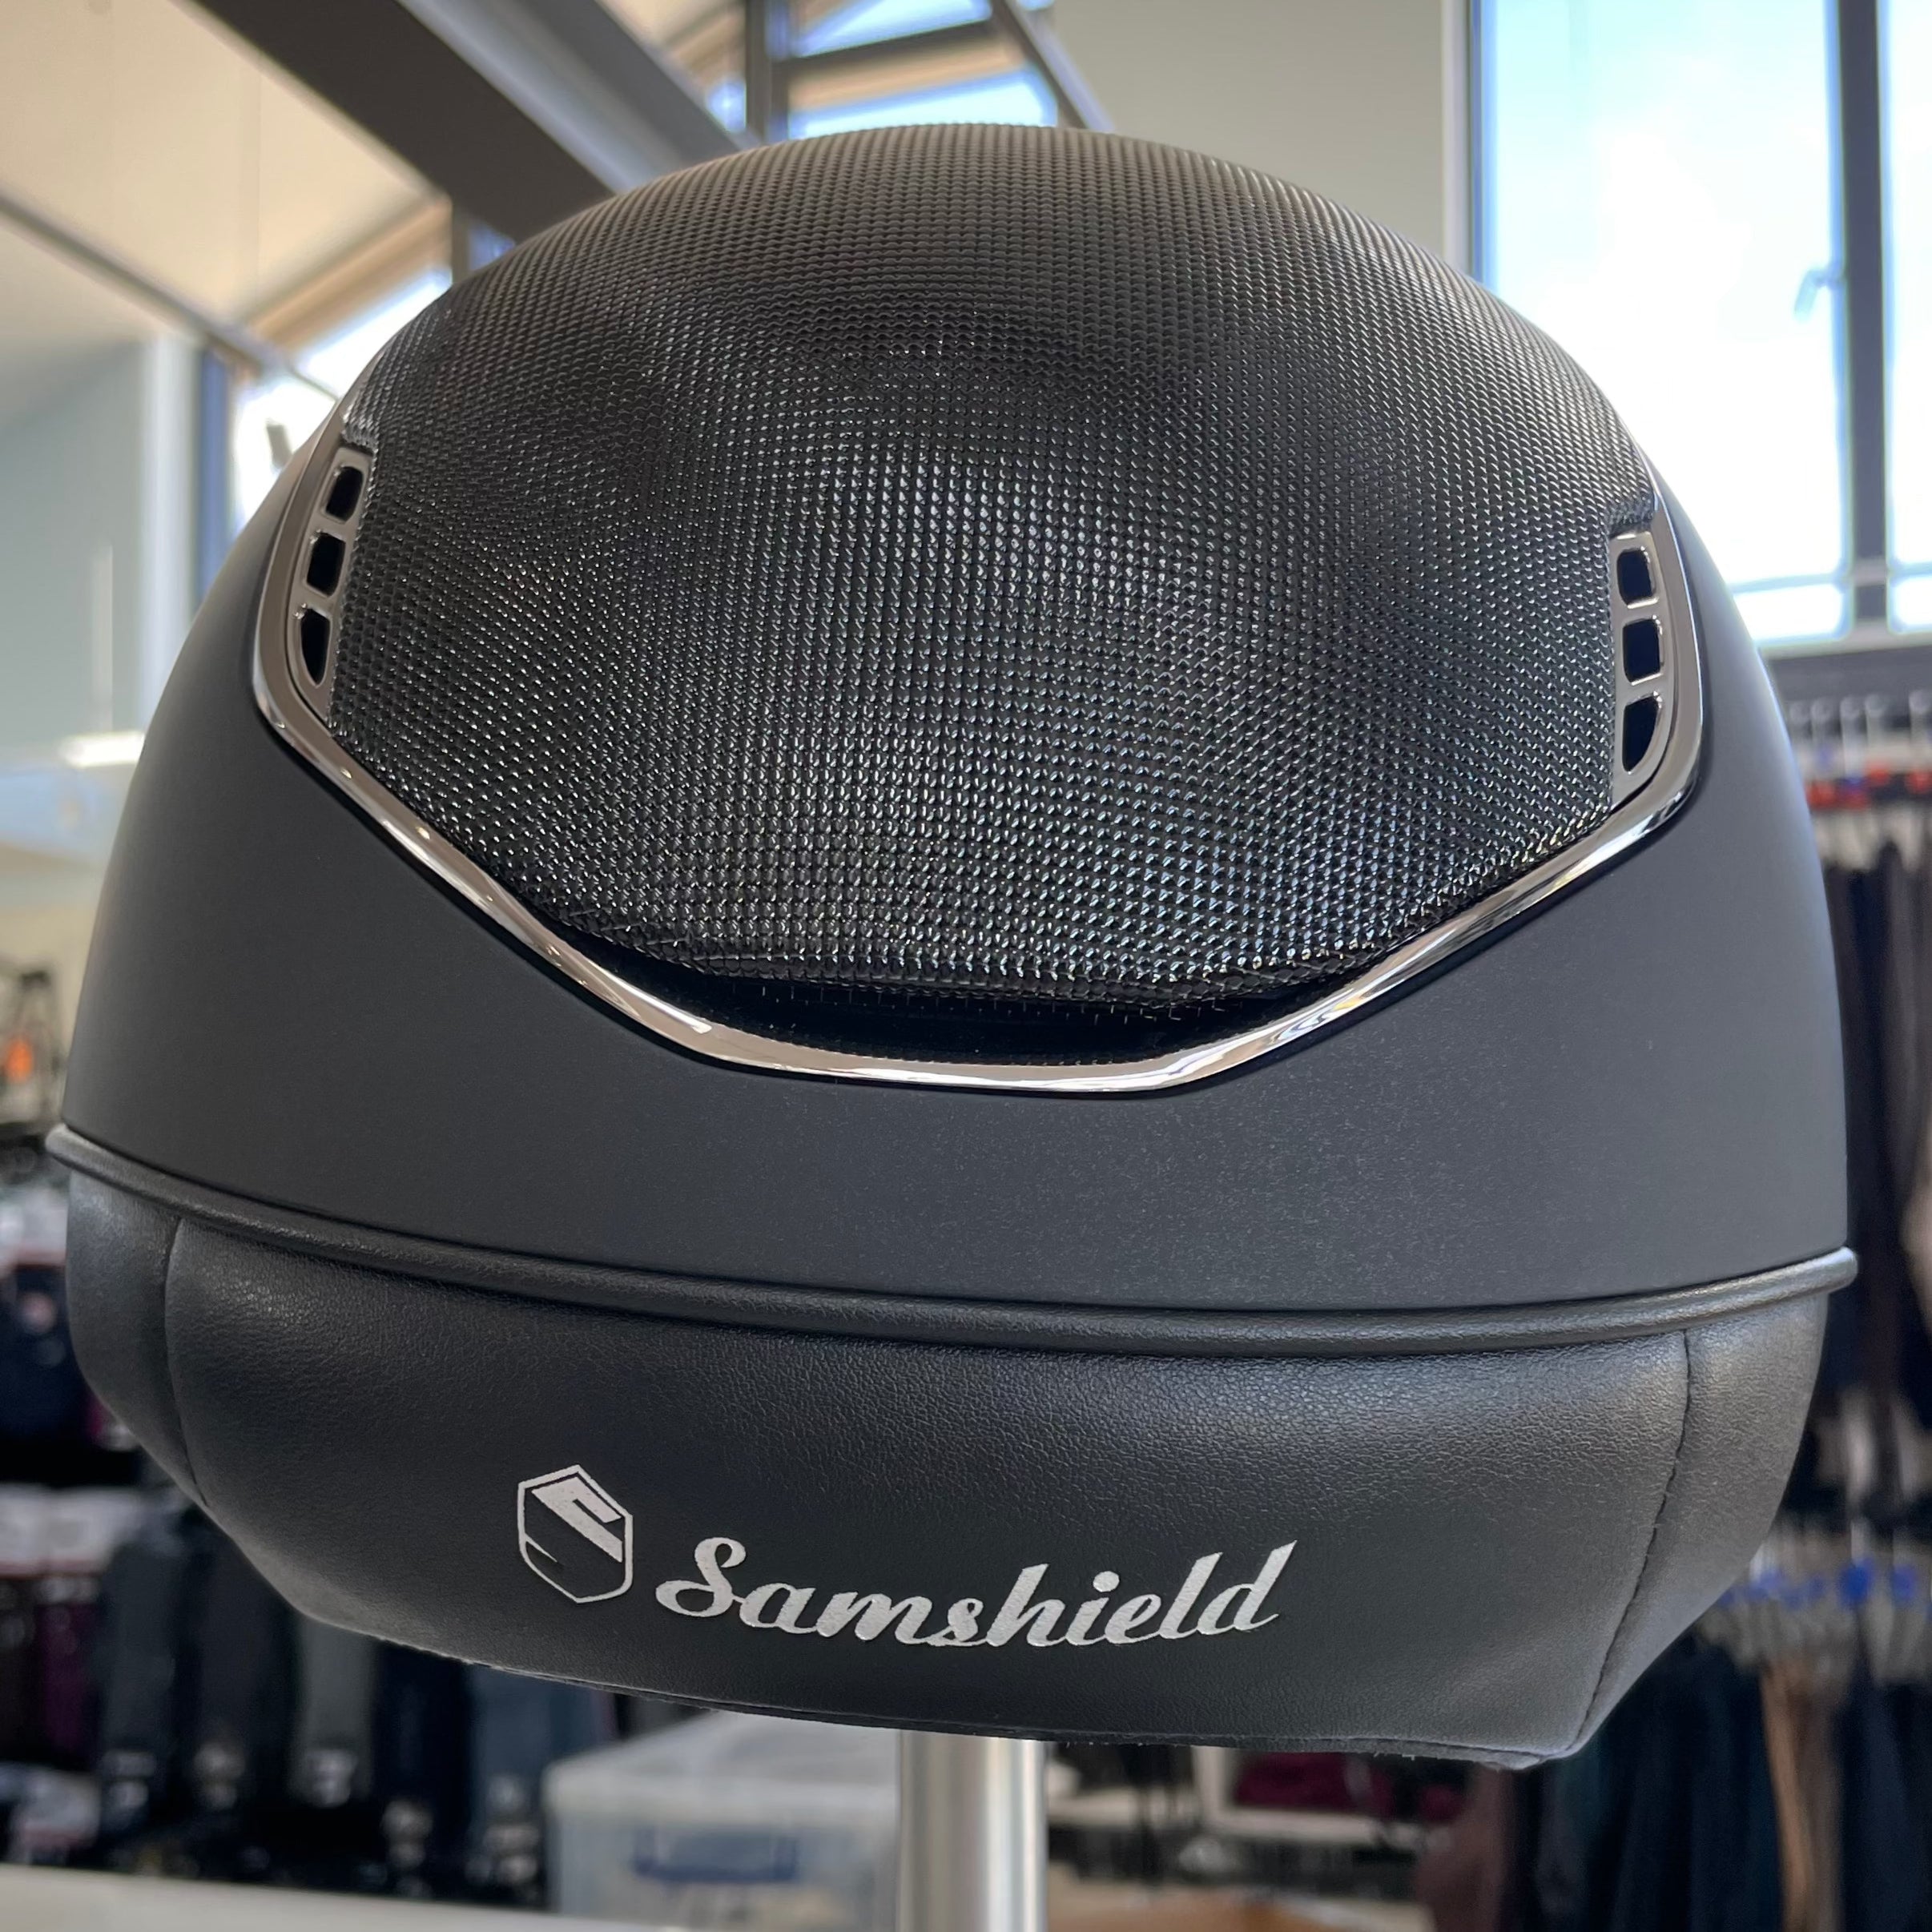 Samshield MissShield 2.0 Black with Black chrome and shimmer top and frontal band L- in stock and ready to ship!